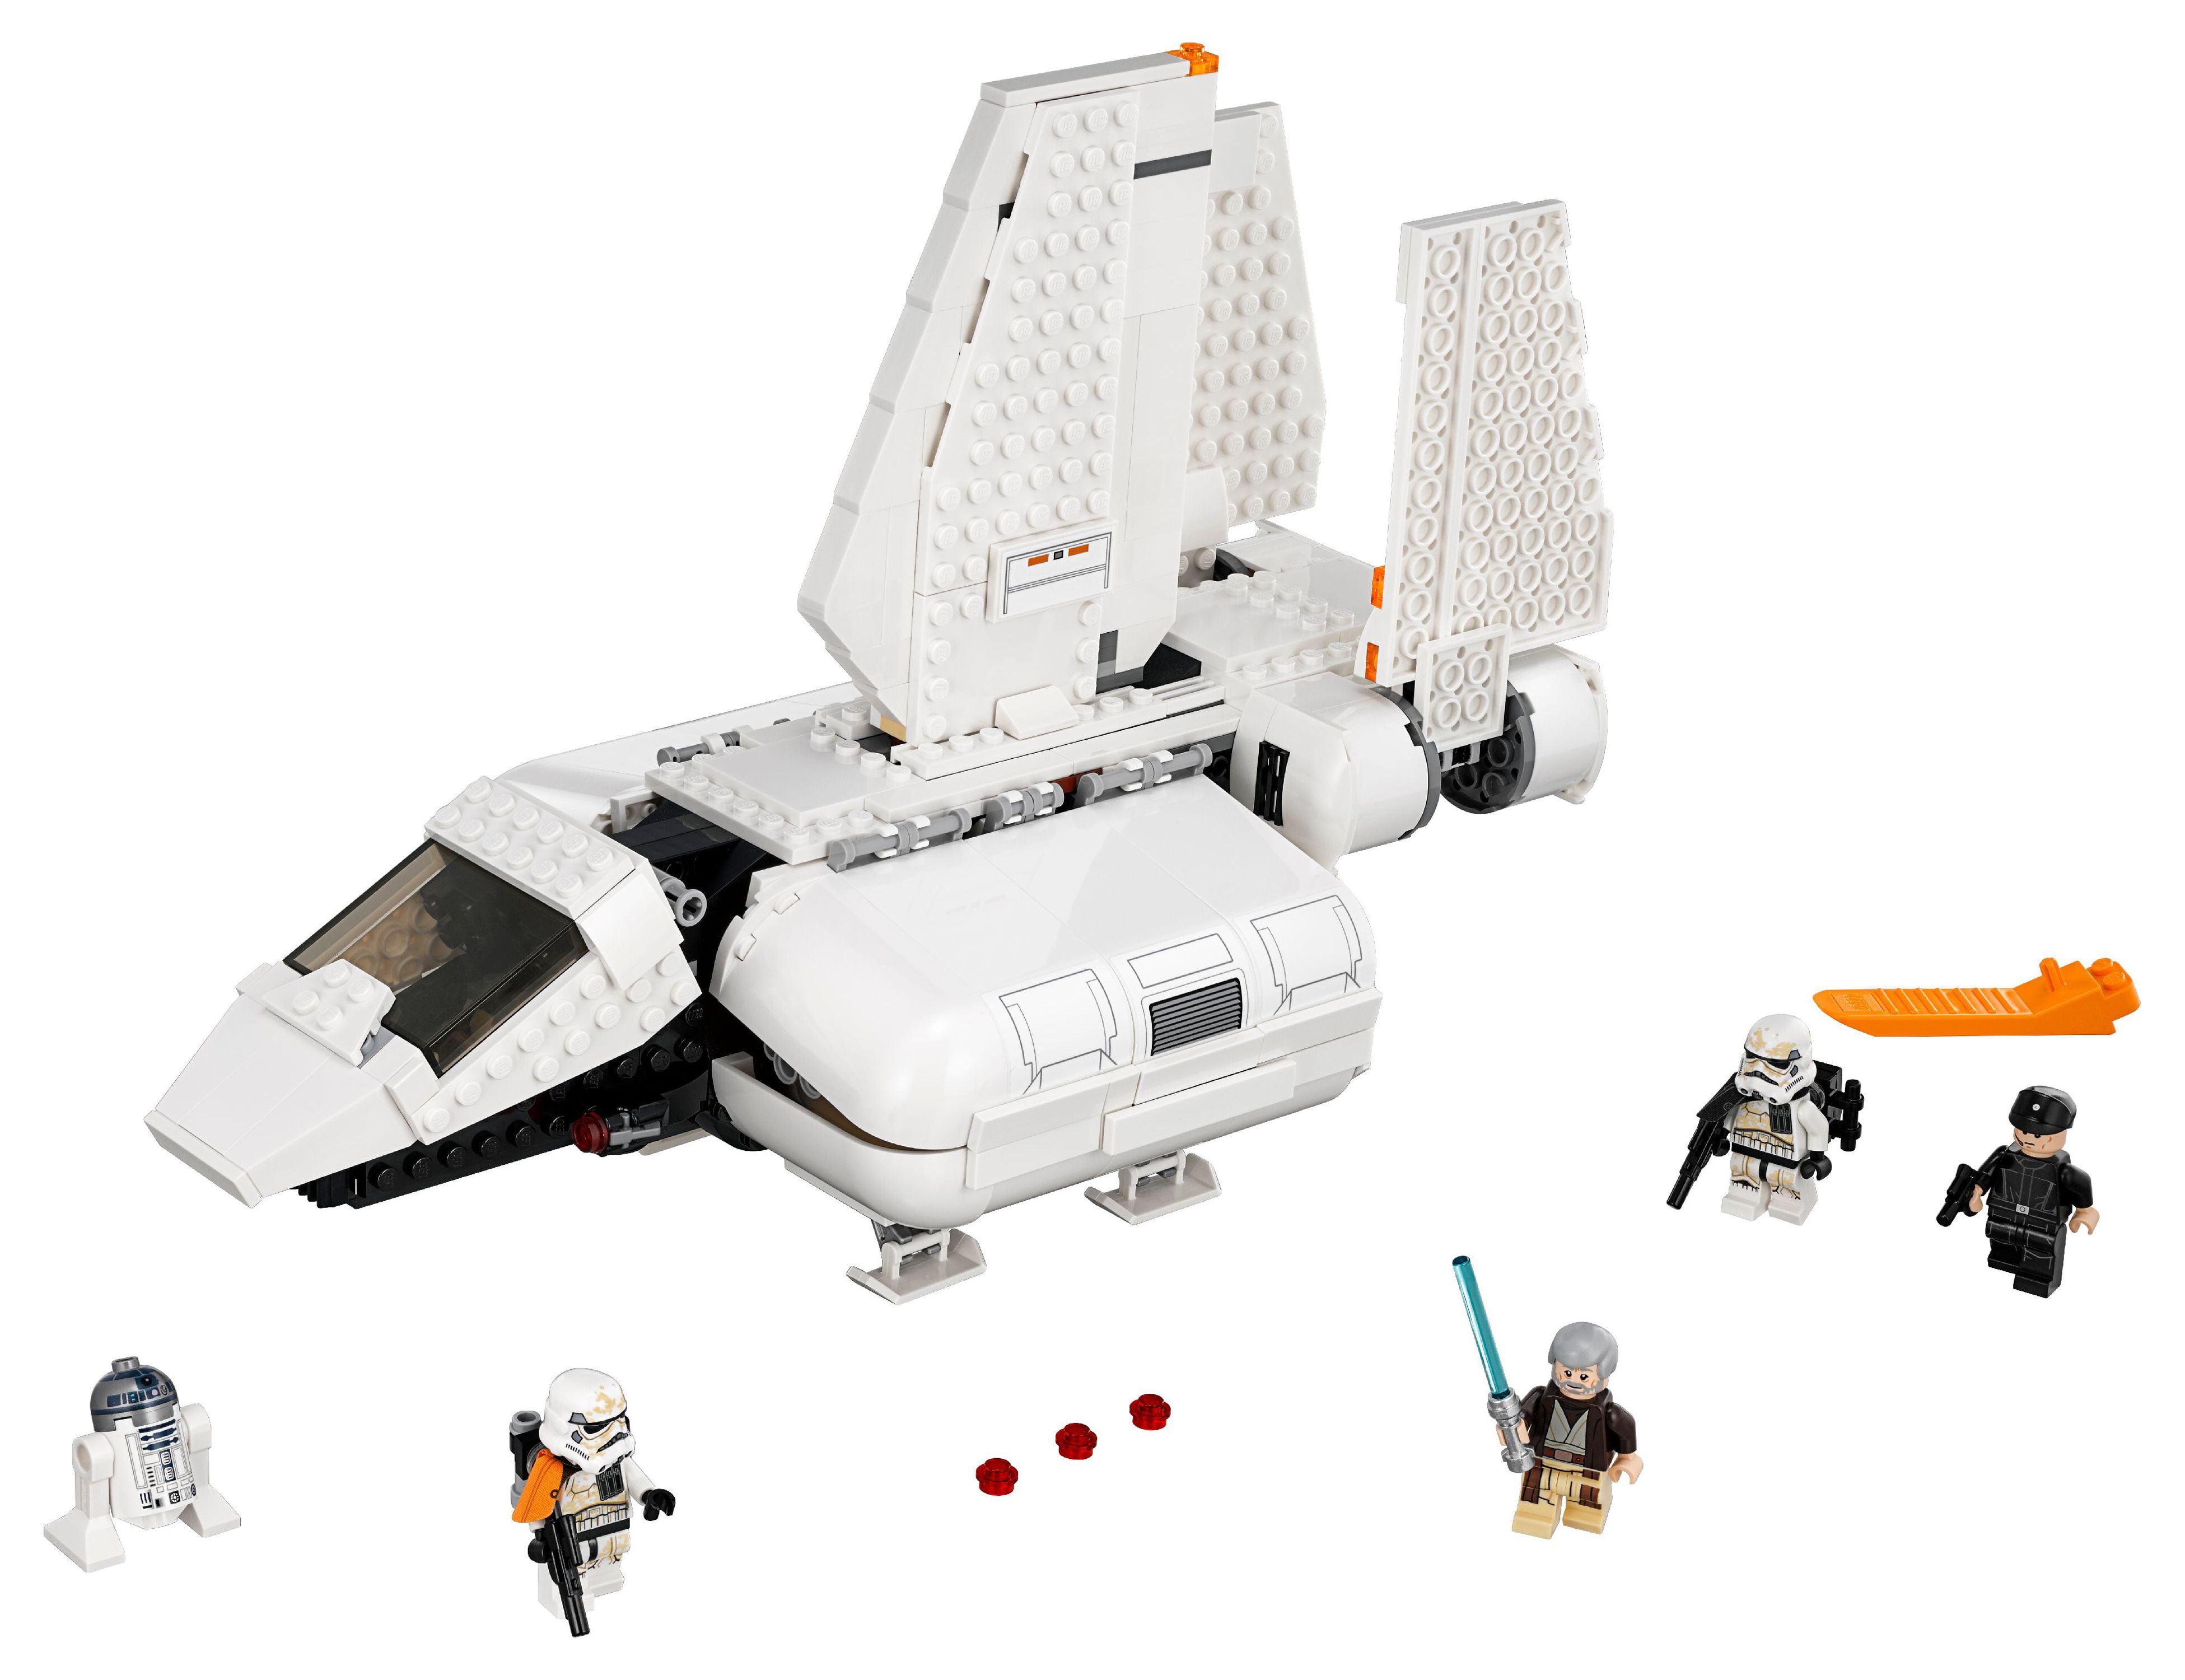 LEGO Star Wars Imperial Landing Craft 75221 - image 2 of 7